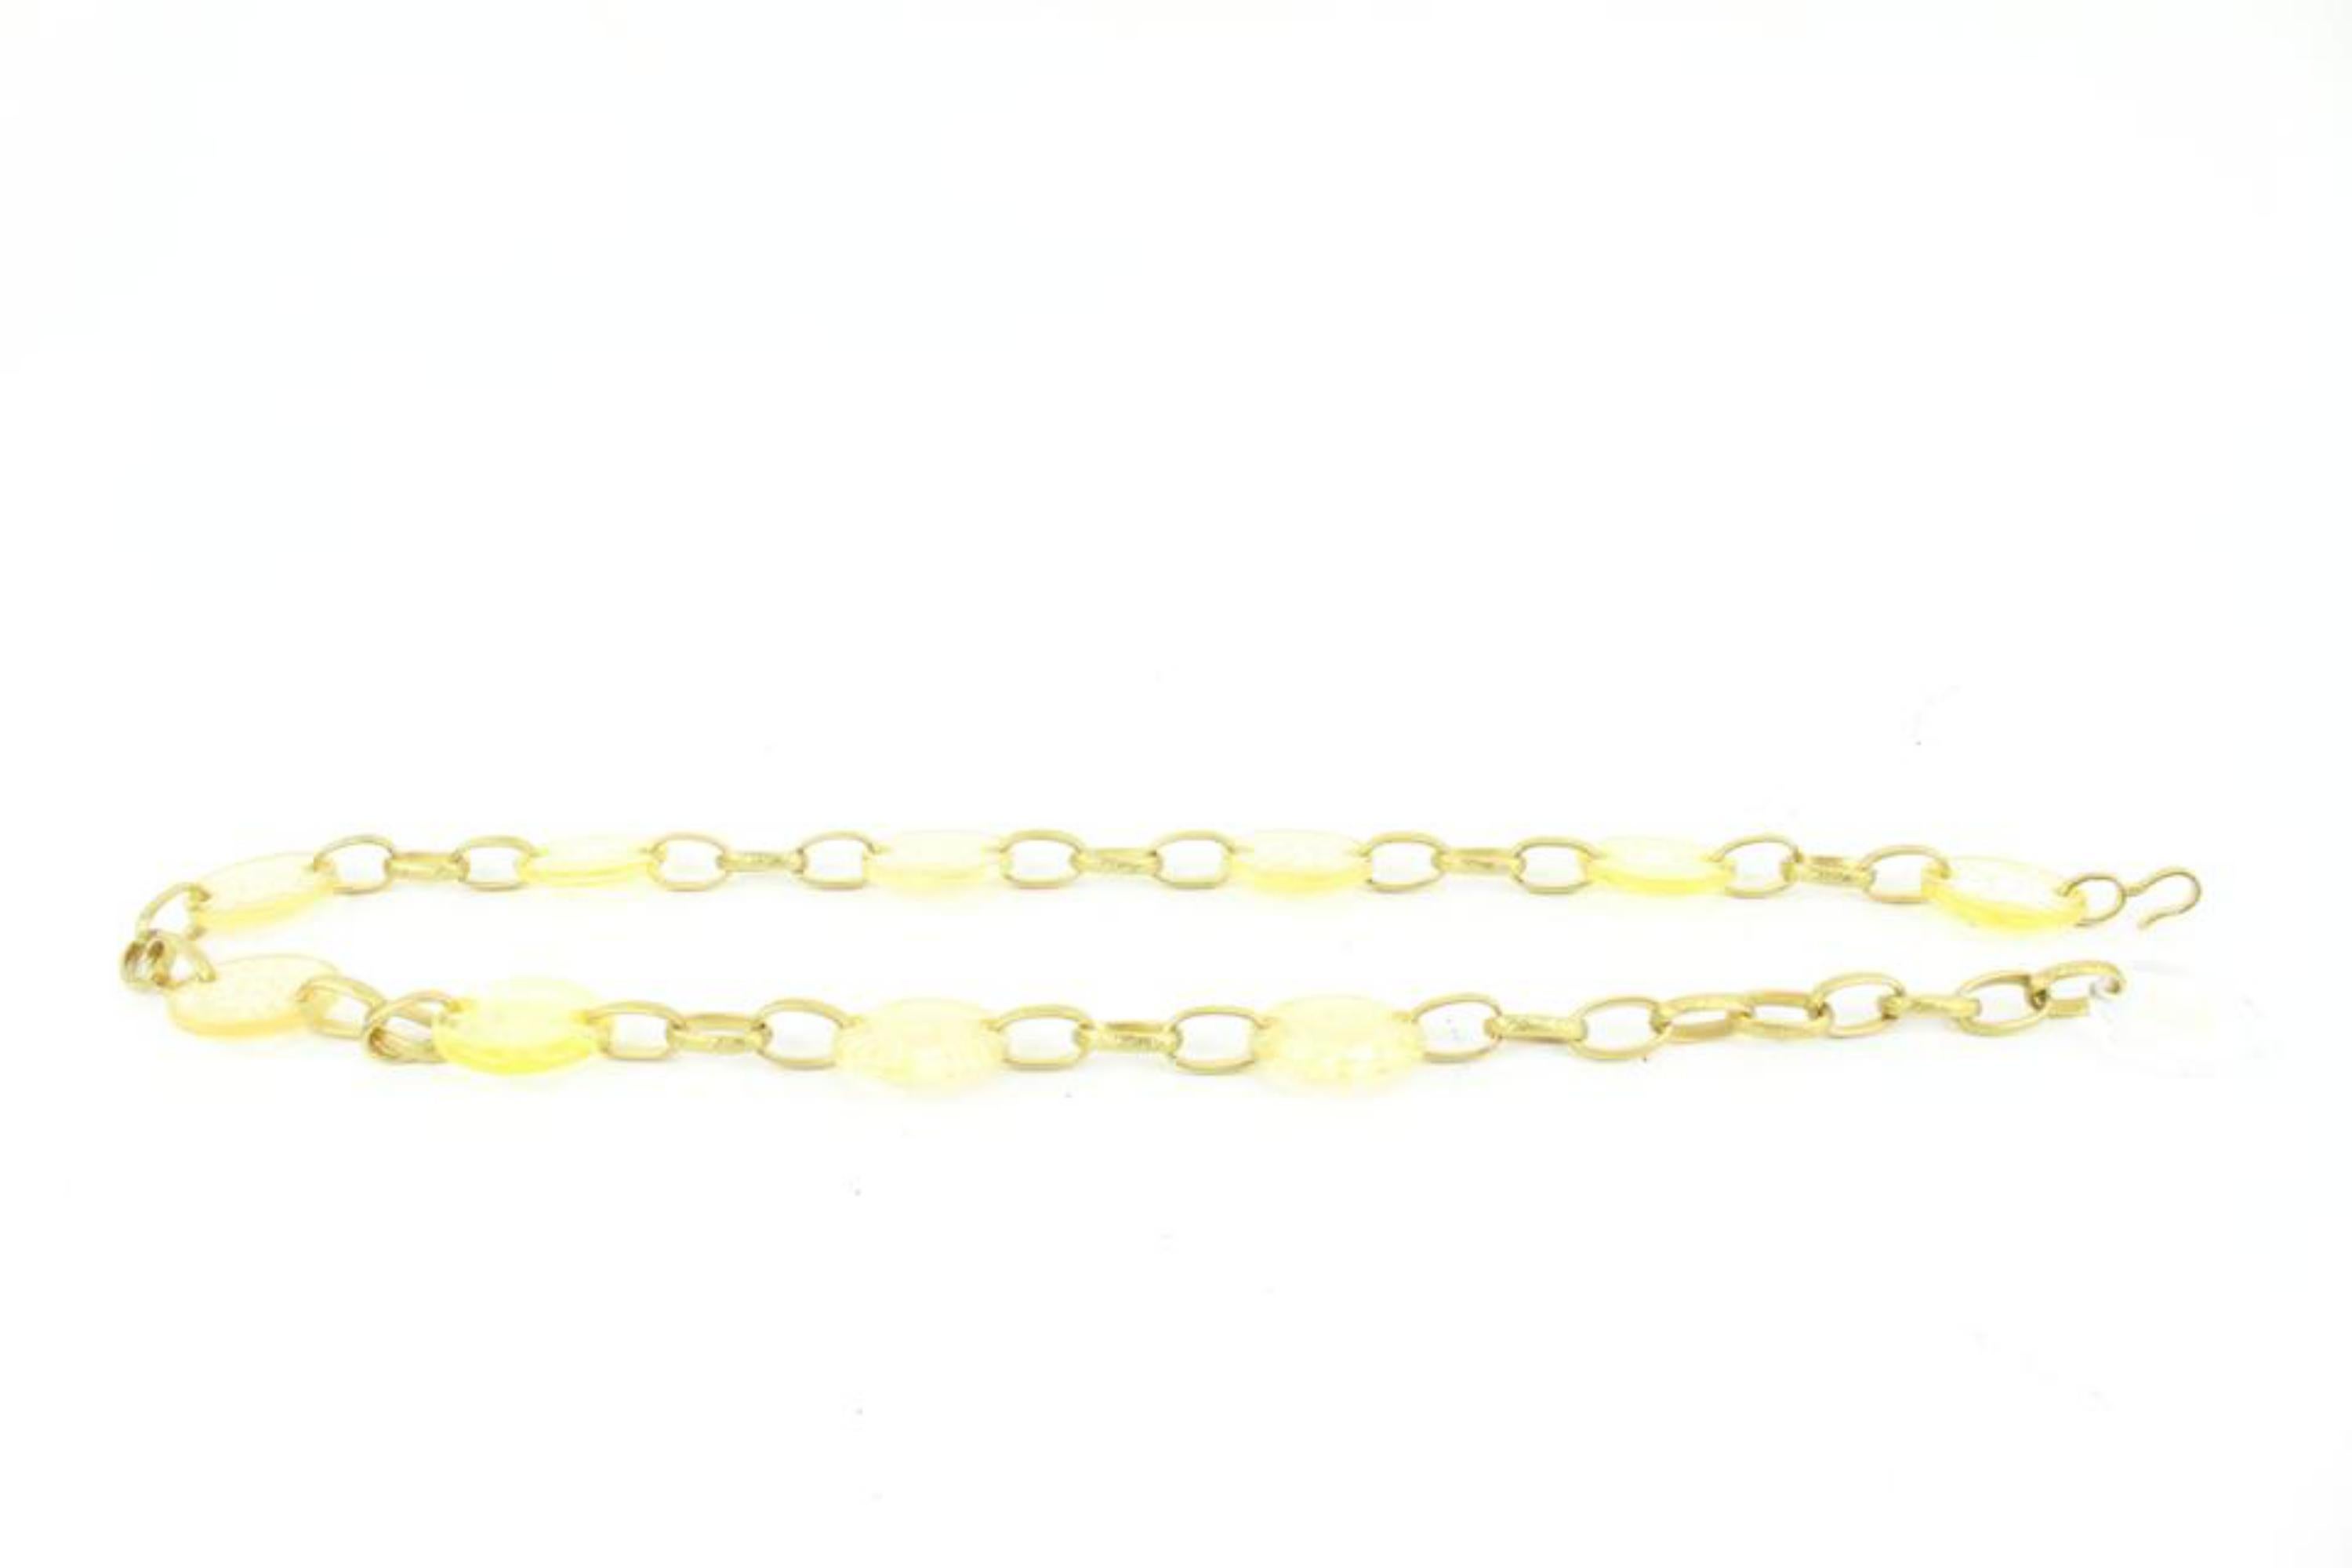 Chanel 95C Clear x Gold CC Chain Belt Necklace 2way 89cz425s For Sale 1